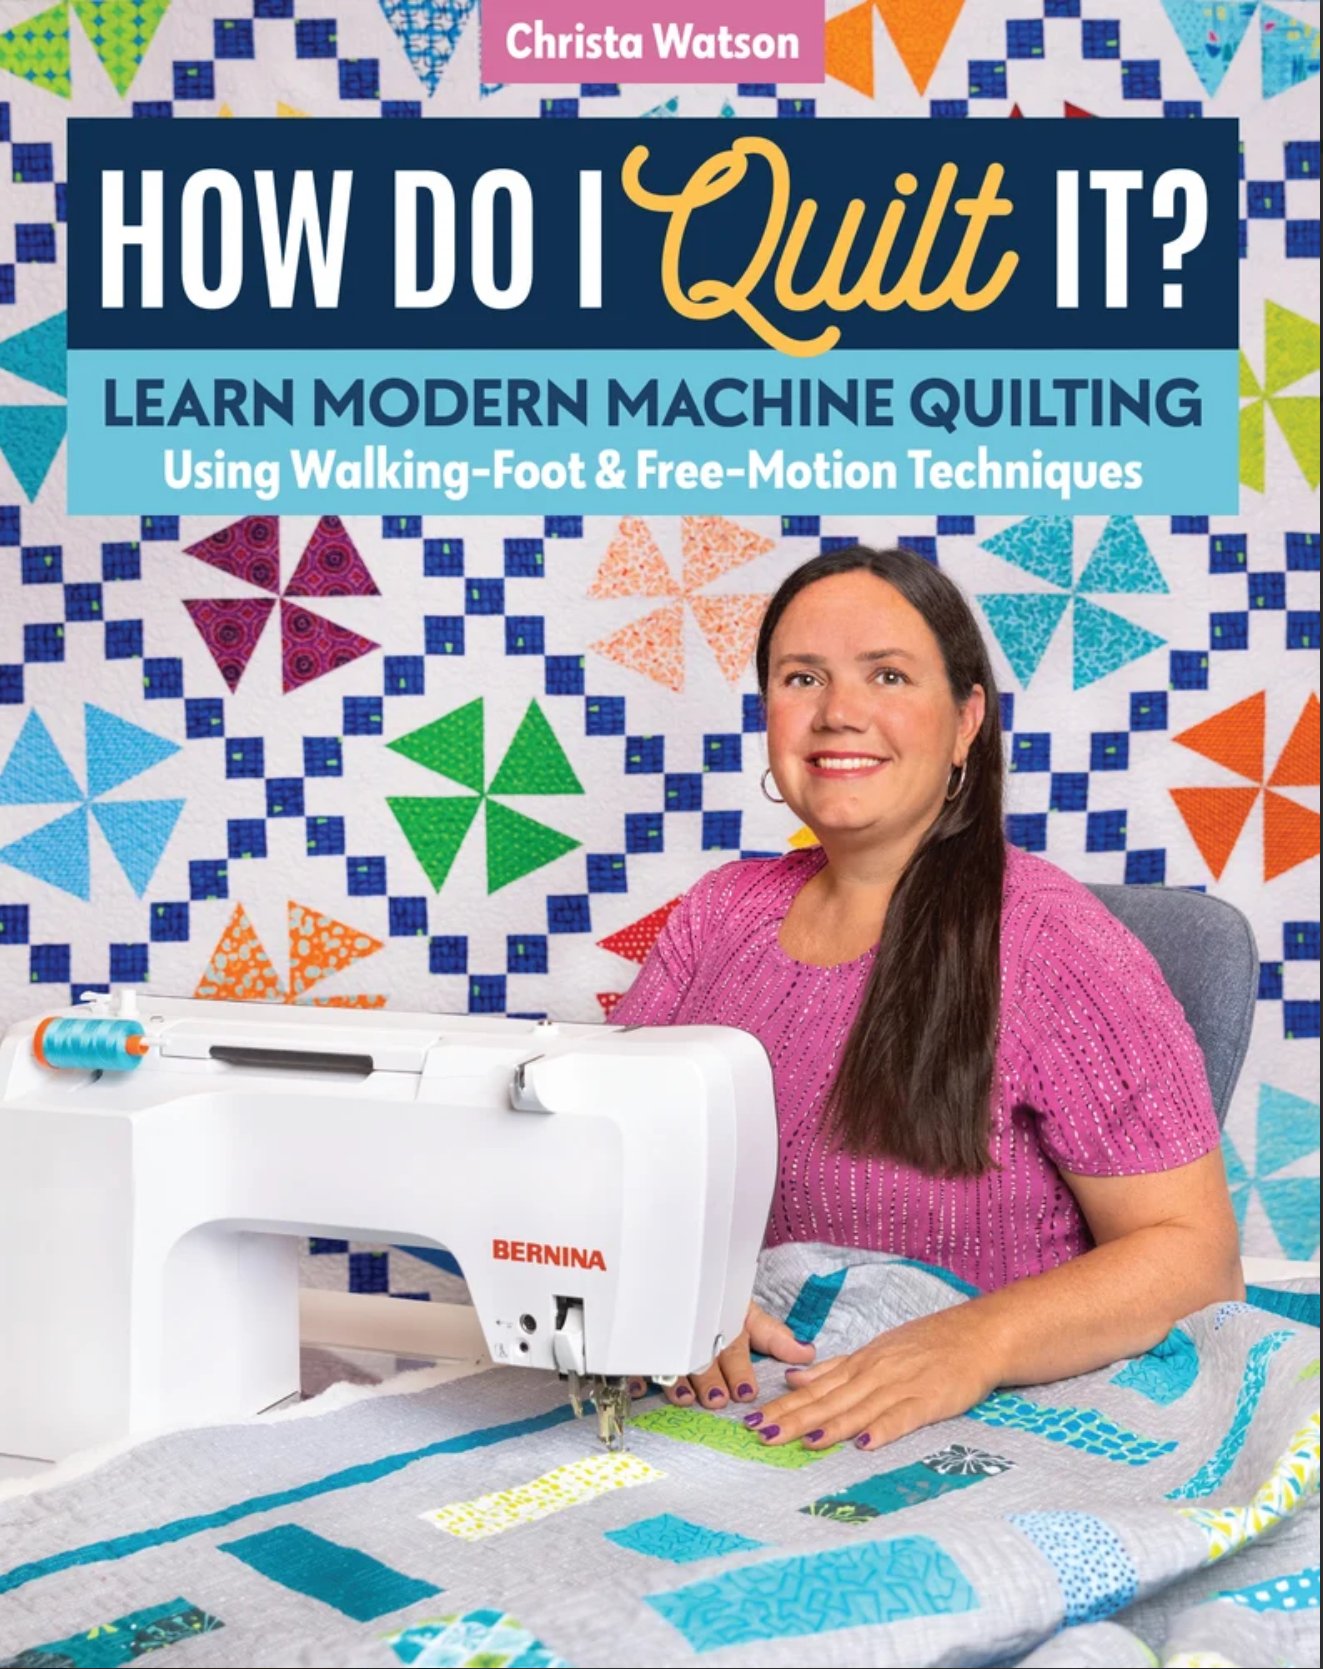 Book: How Do I Quilt It